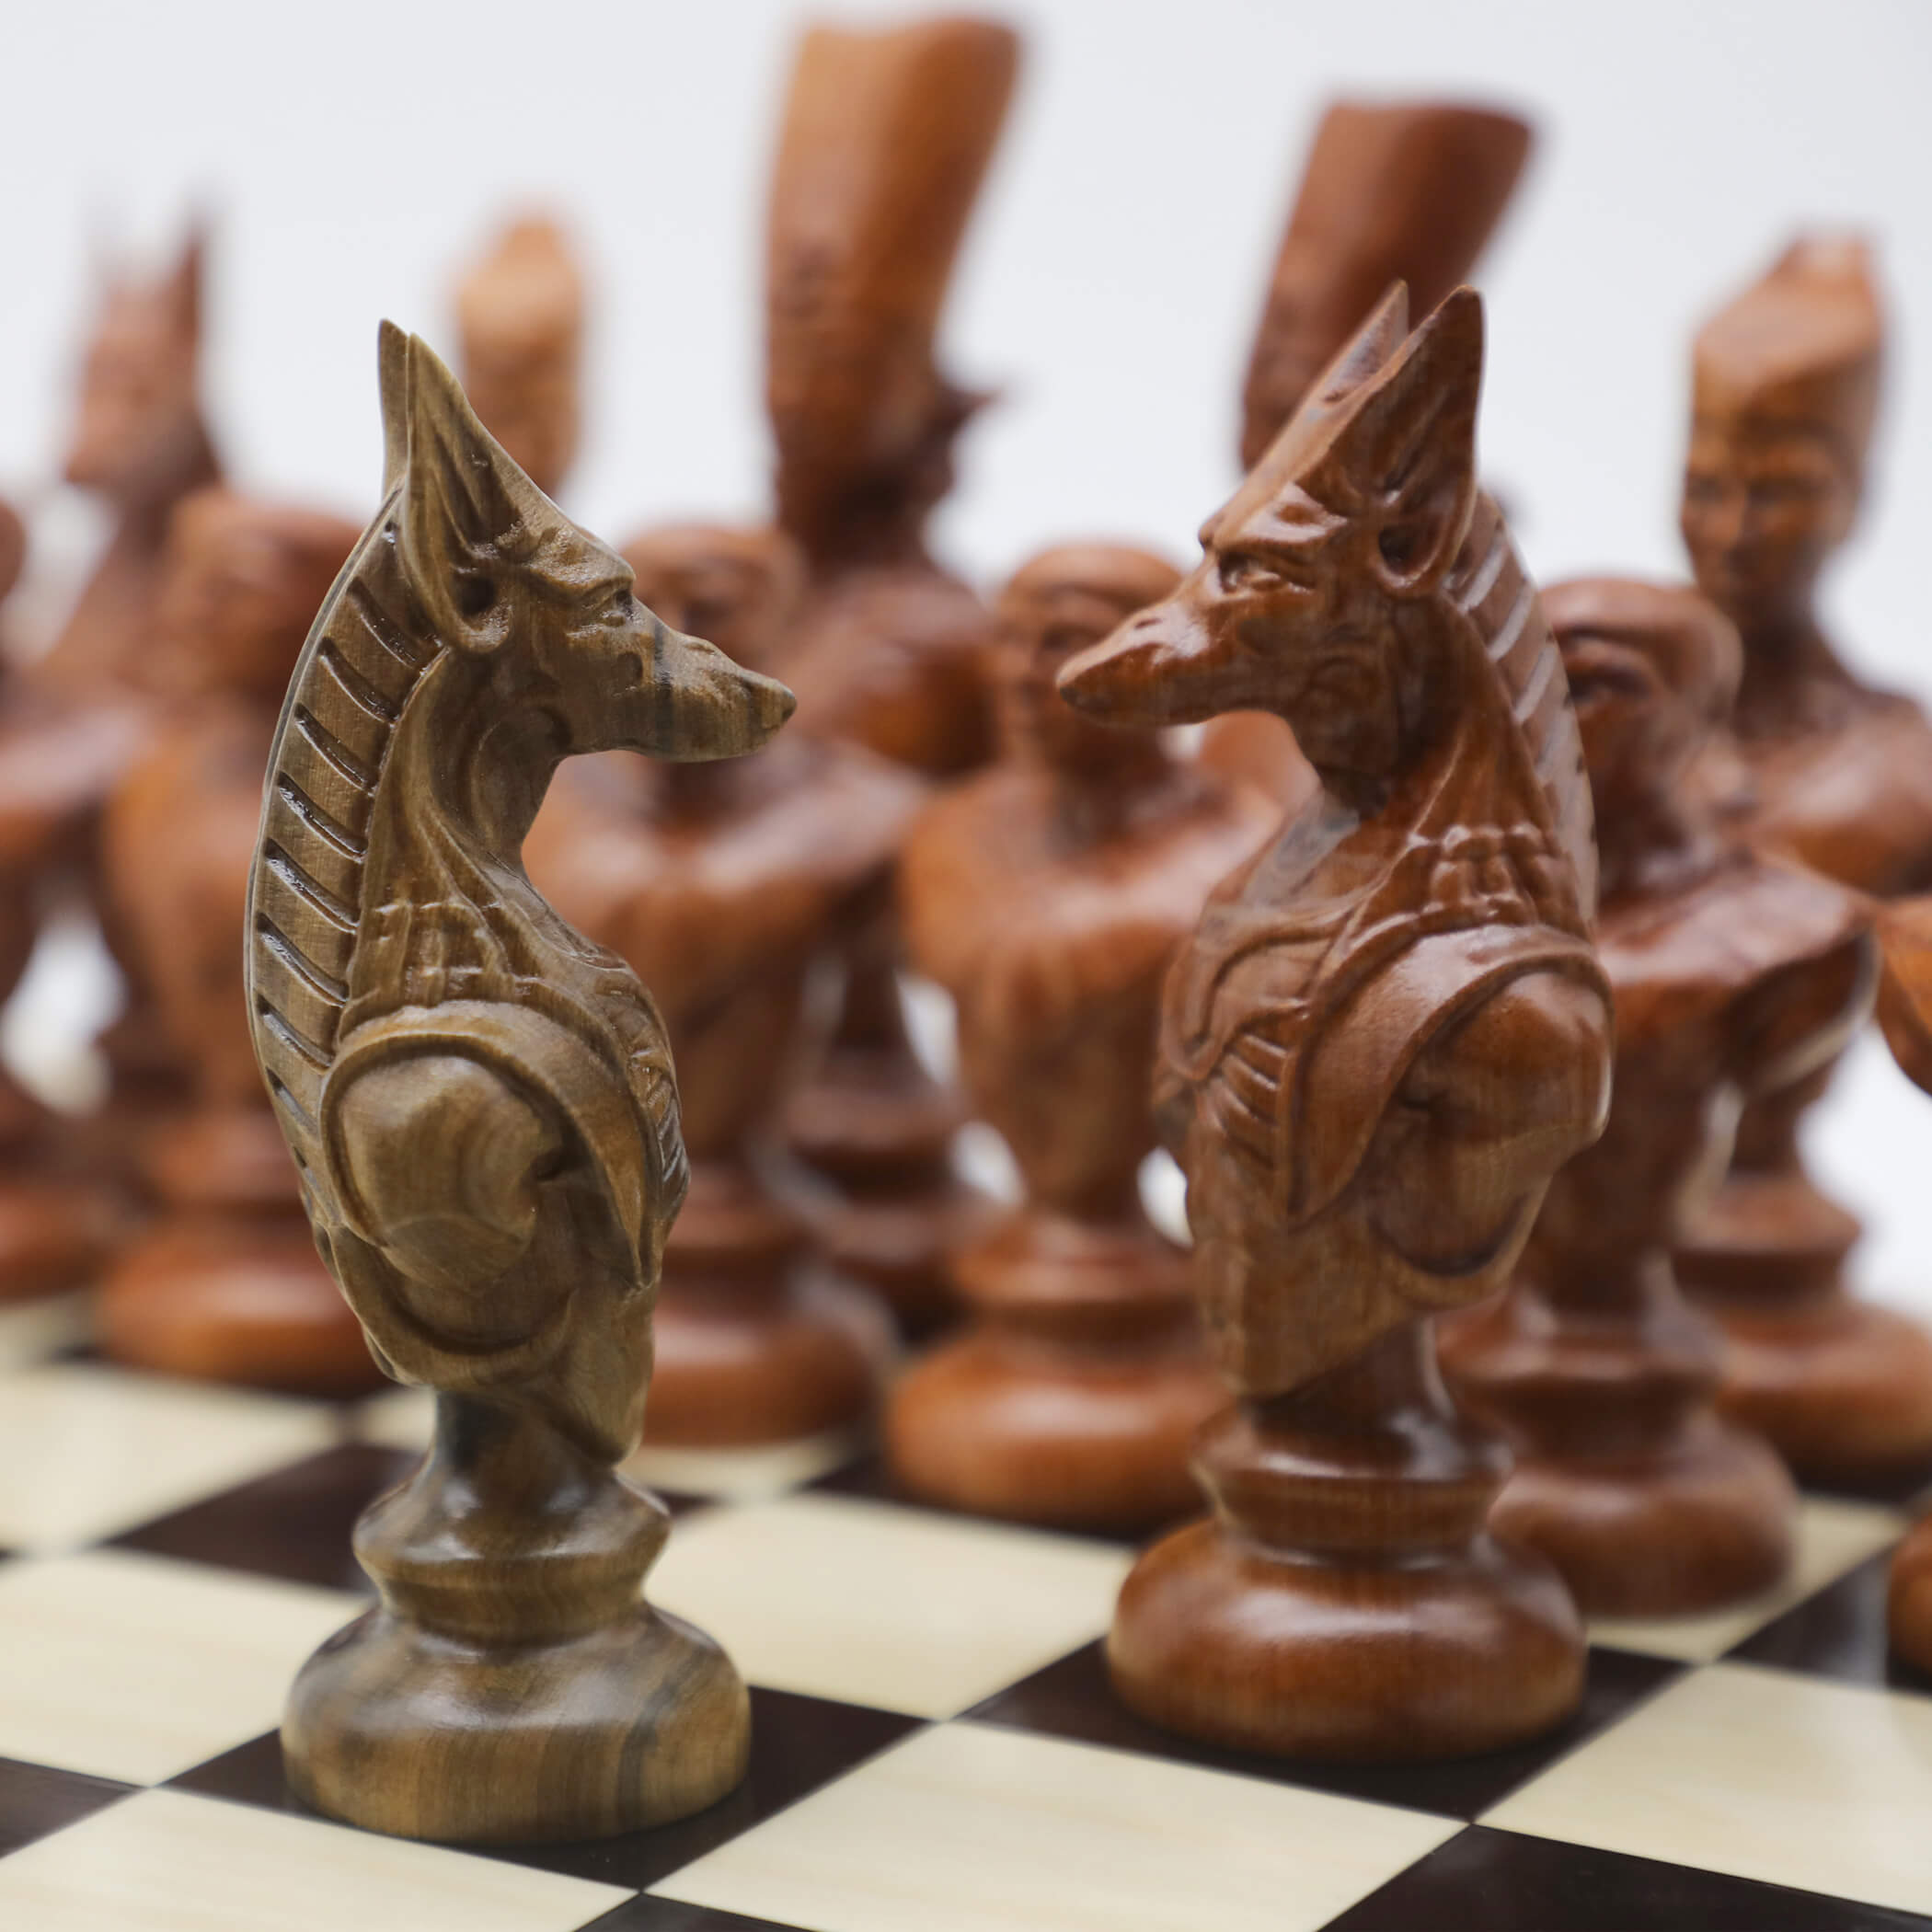 Beautiful Themed Chess Sets - Henry Le Chess Sets